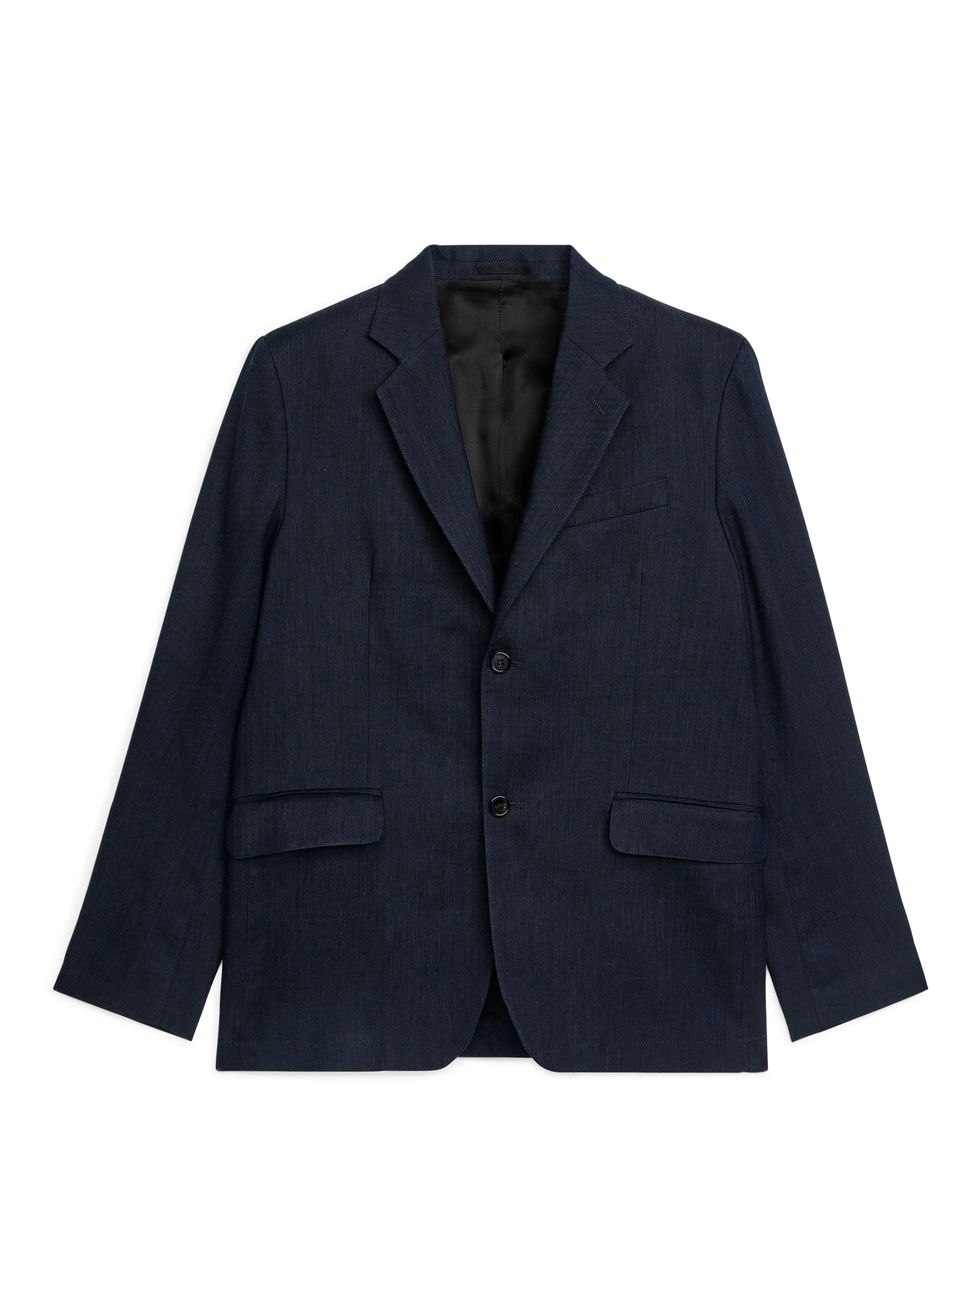 The Best Men's Navy Suits, From Uniqlo and Reiss to Tom Ford